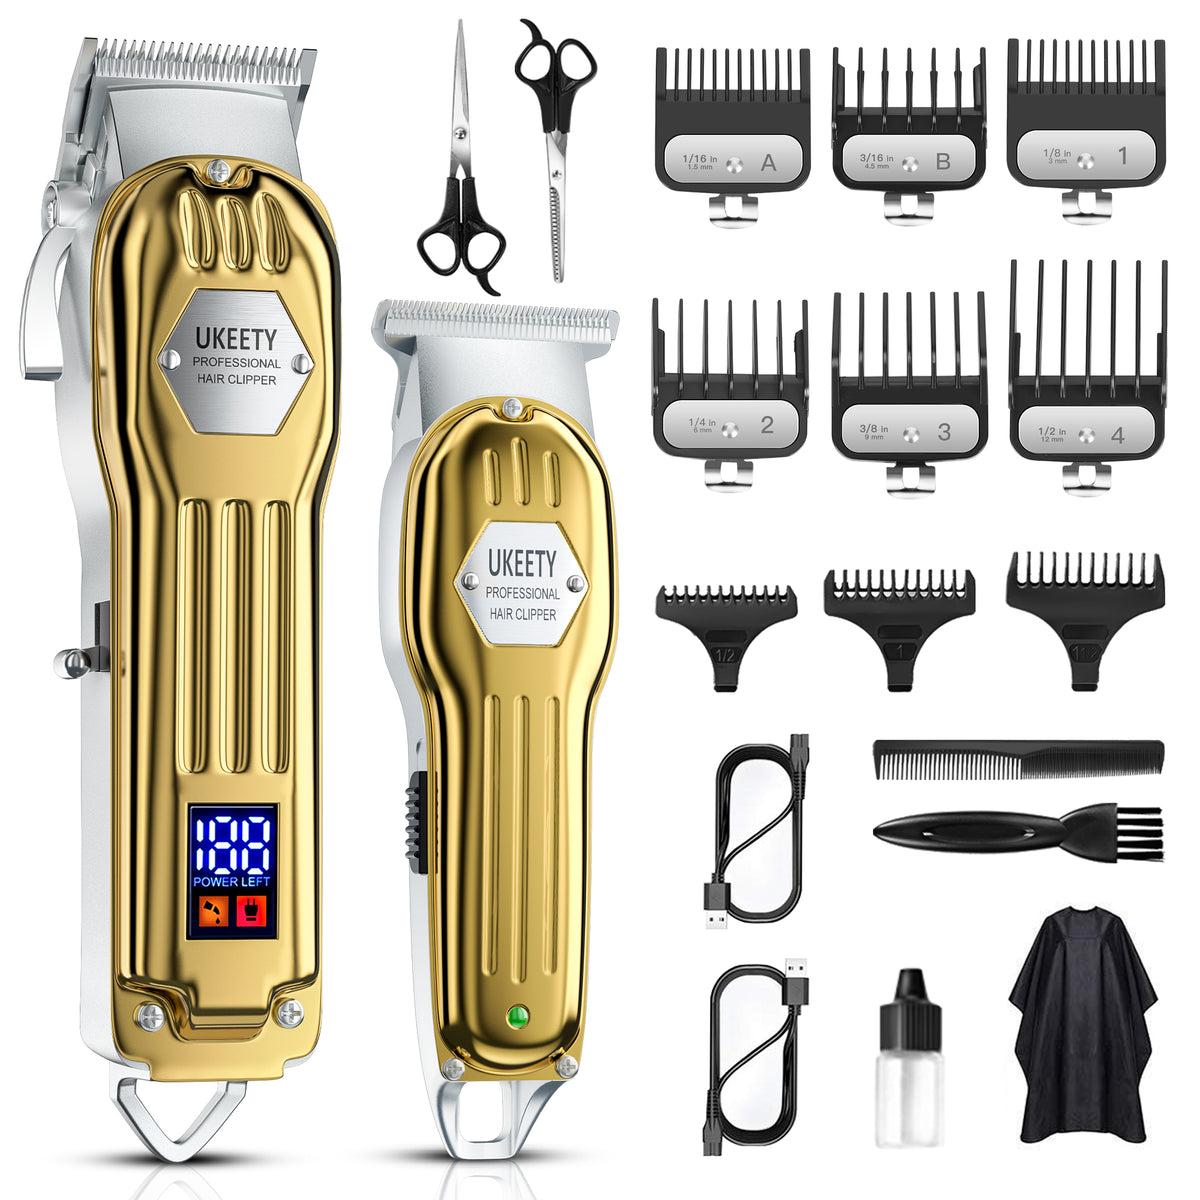 Men's Hair Clippers, Electric Beard Trimmer LED Screen, Wireless Hair  Clipper Razor Beard Trimmer Kit for Kids and Family (Gold)